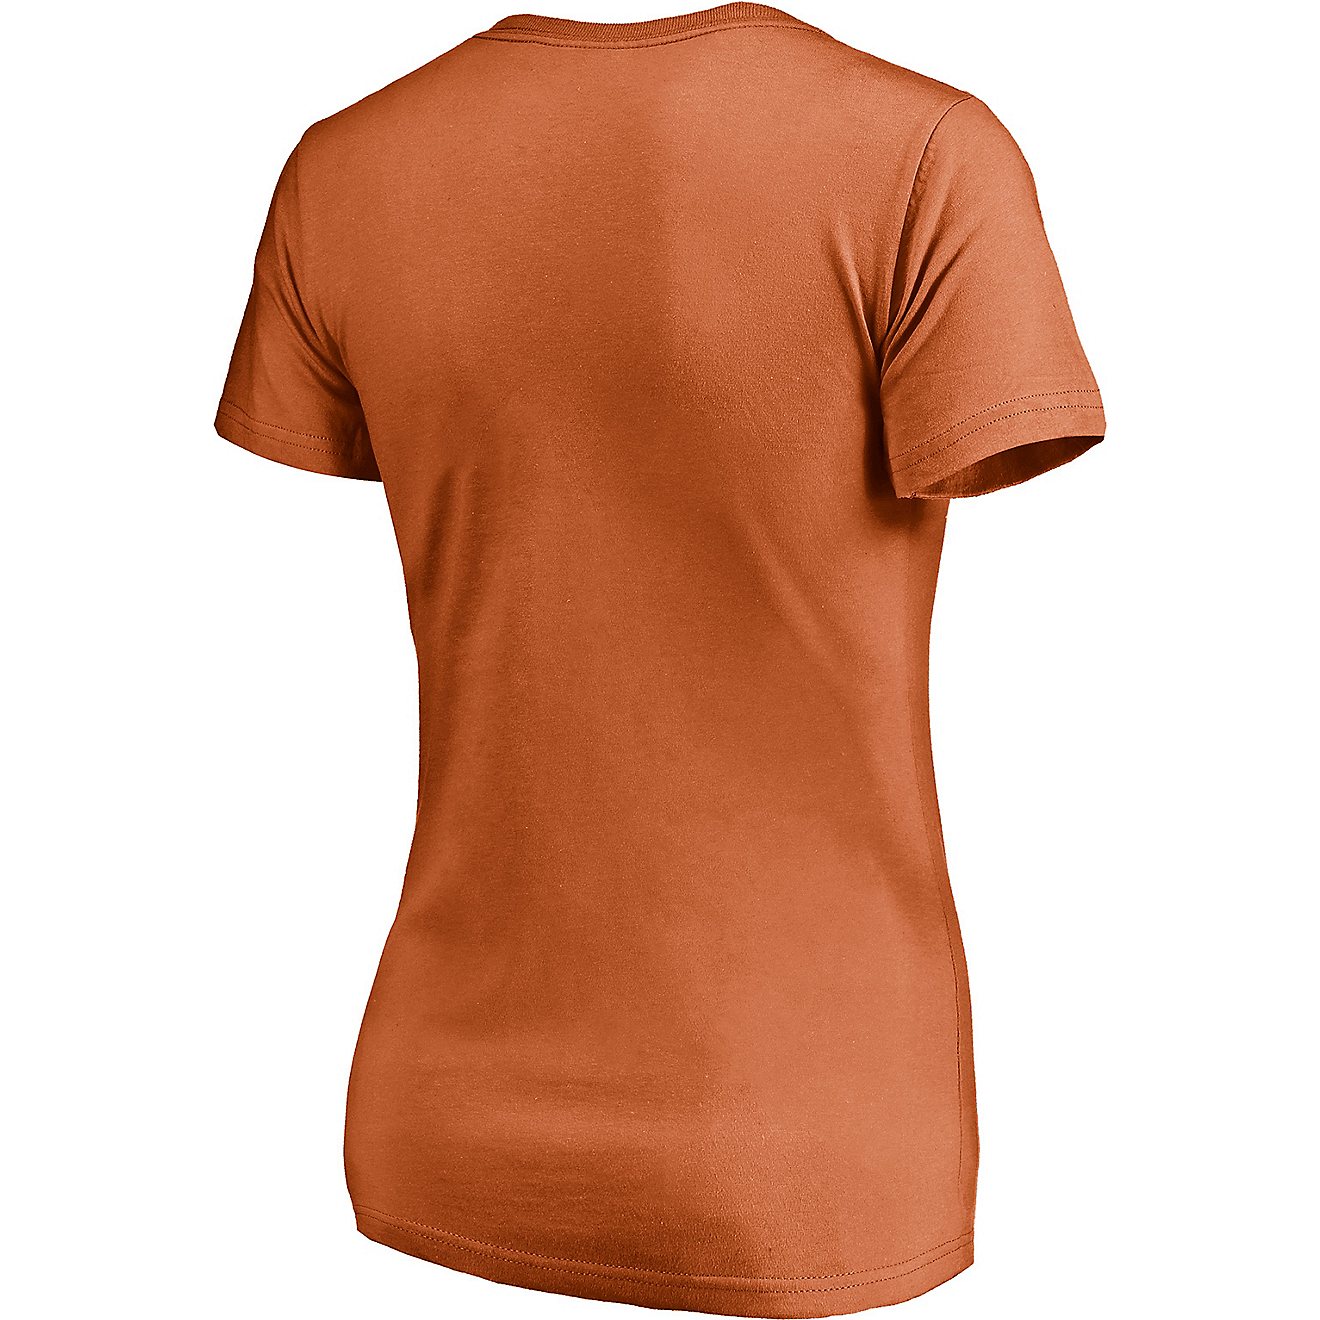 University of Texas Women’s Campus Visit Graphic T-shirt                                                                       - view number 3